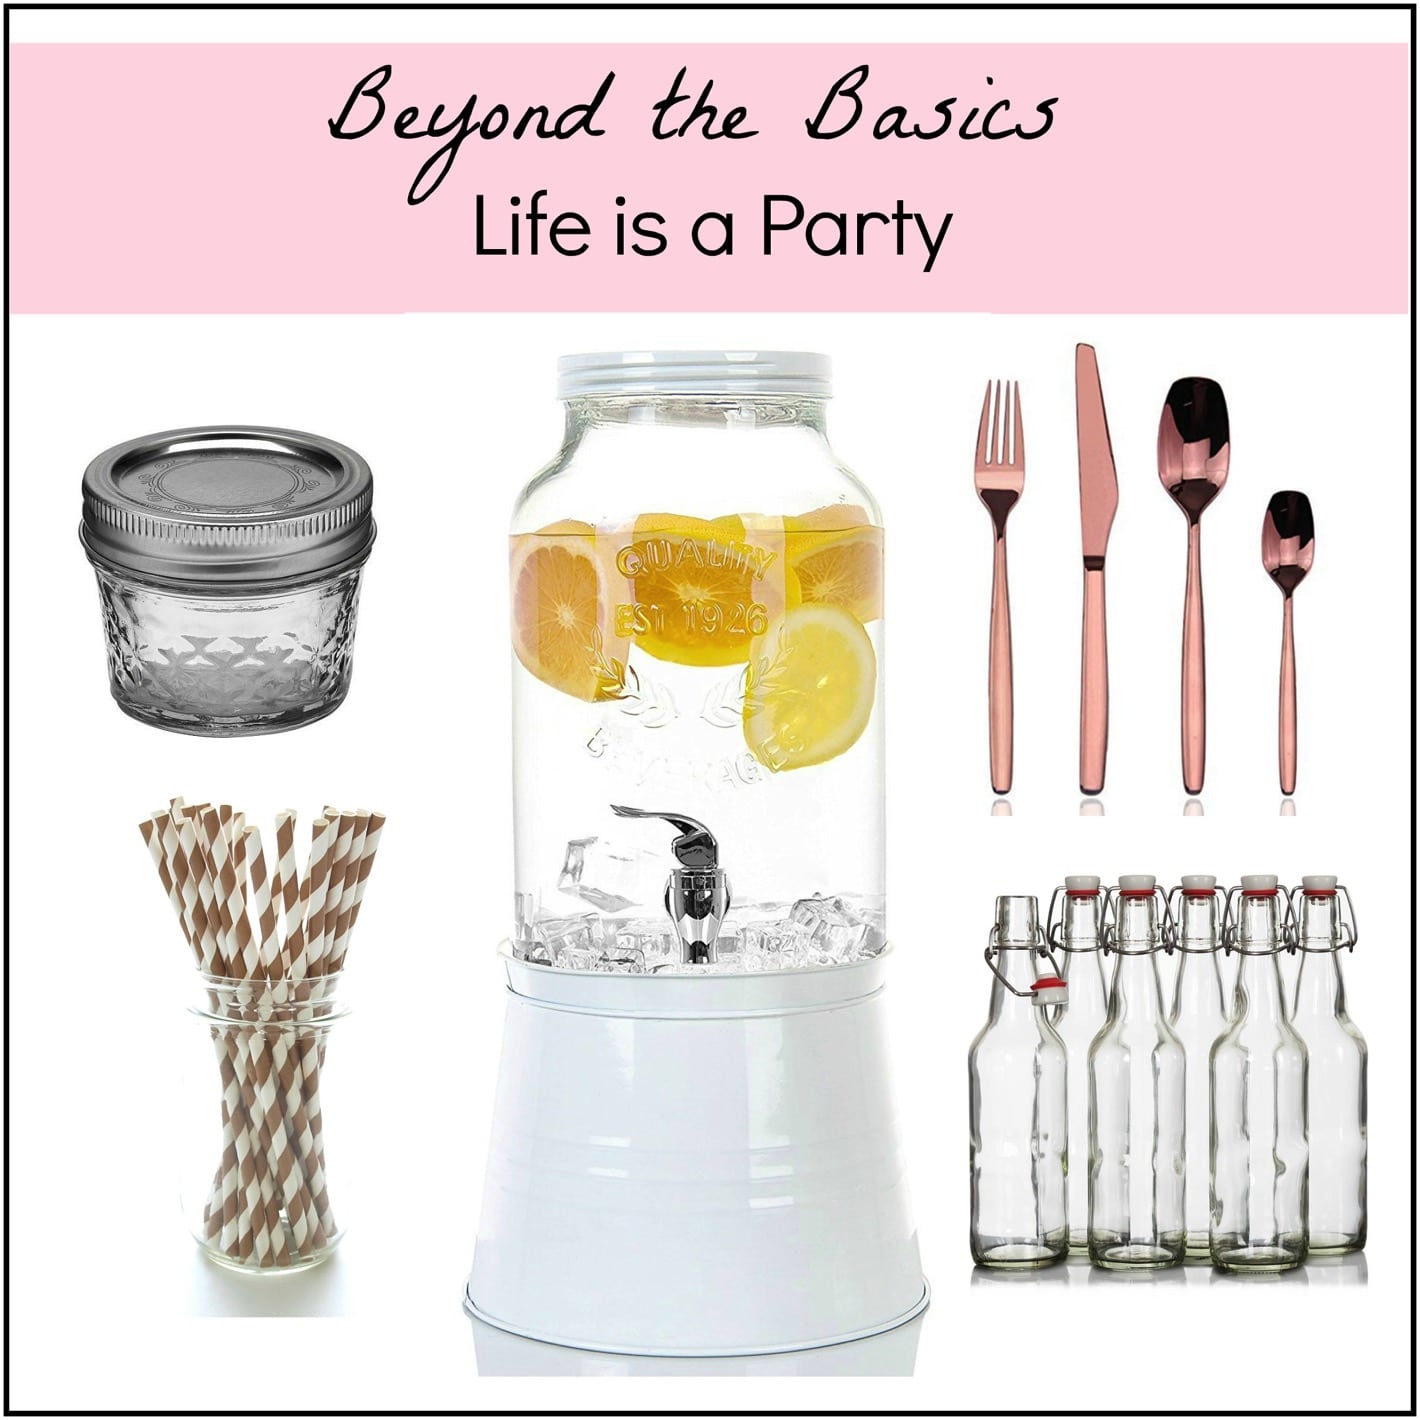 Entertaining Essentials -from the basics like white dishes and stemless wine glasses to the extras like a great drink dispenser, this list has you covered.